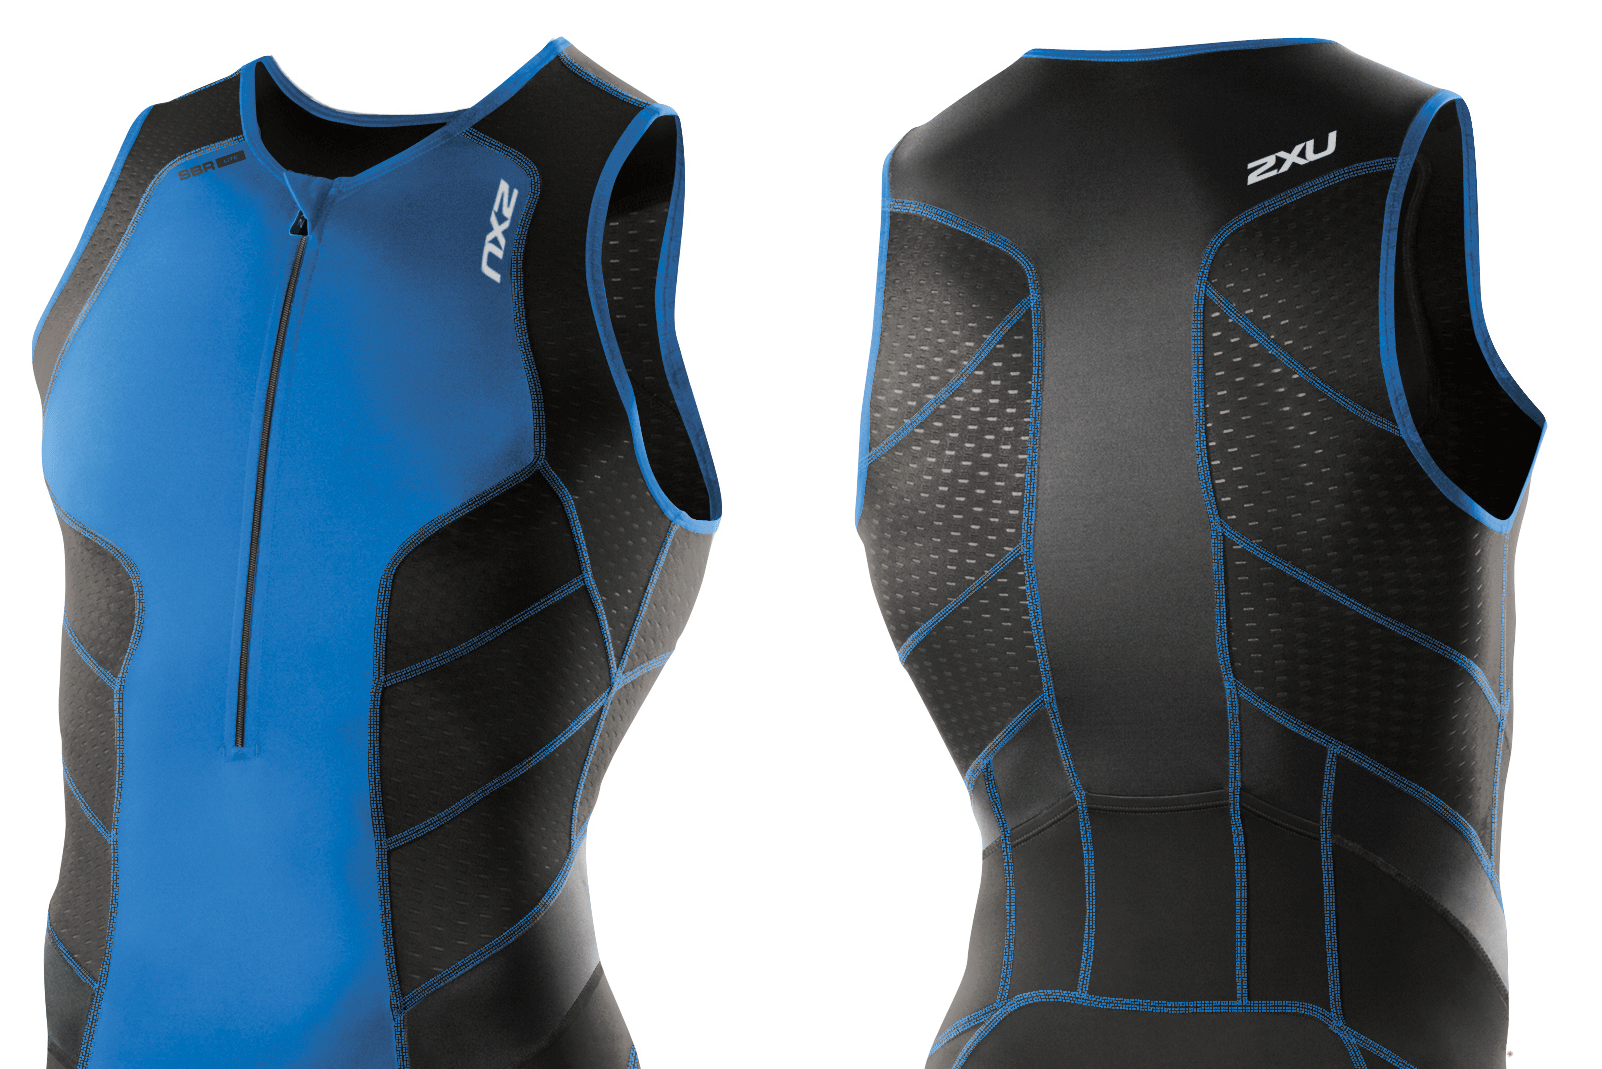 Mesh fabric at the back of the 2XU triathlon suit offers breathability